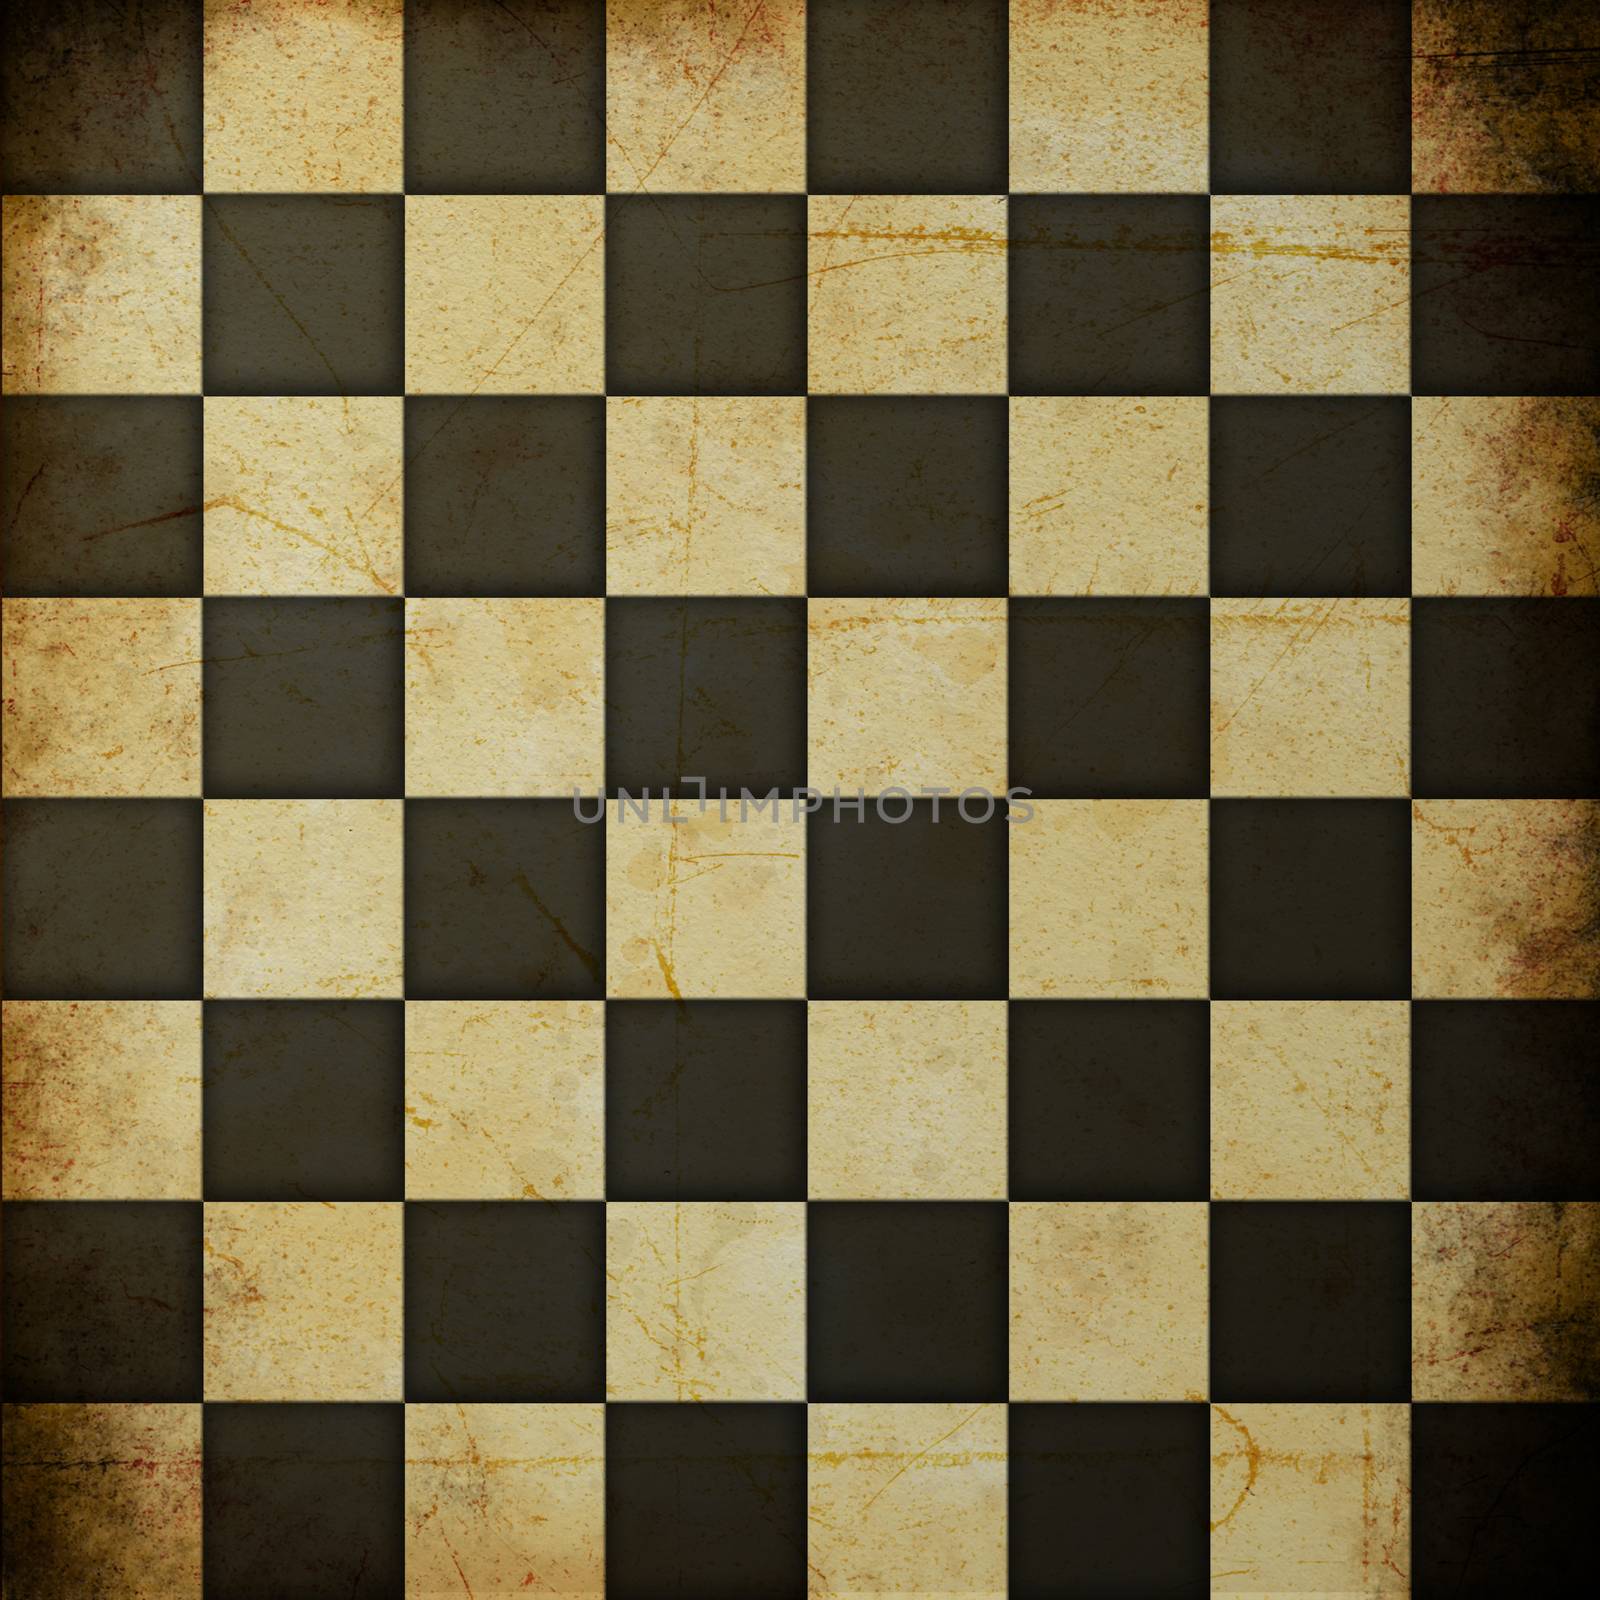 the texture, vintage background of the chessboard design on grunge paper